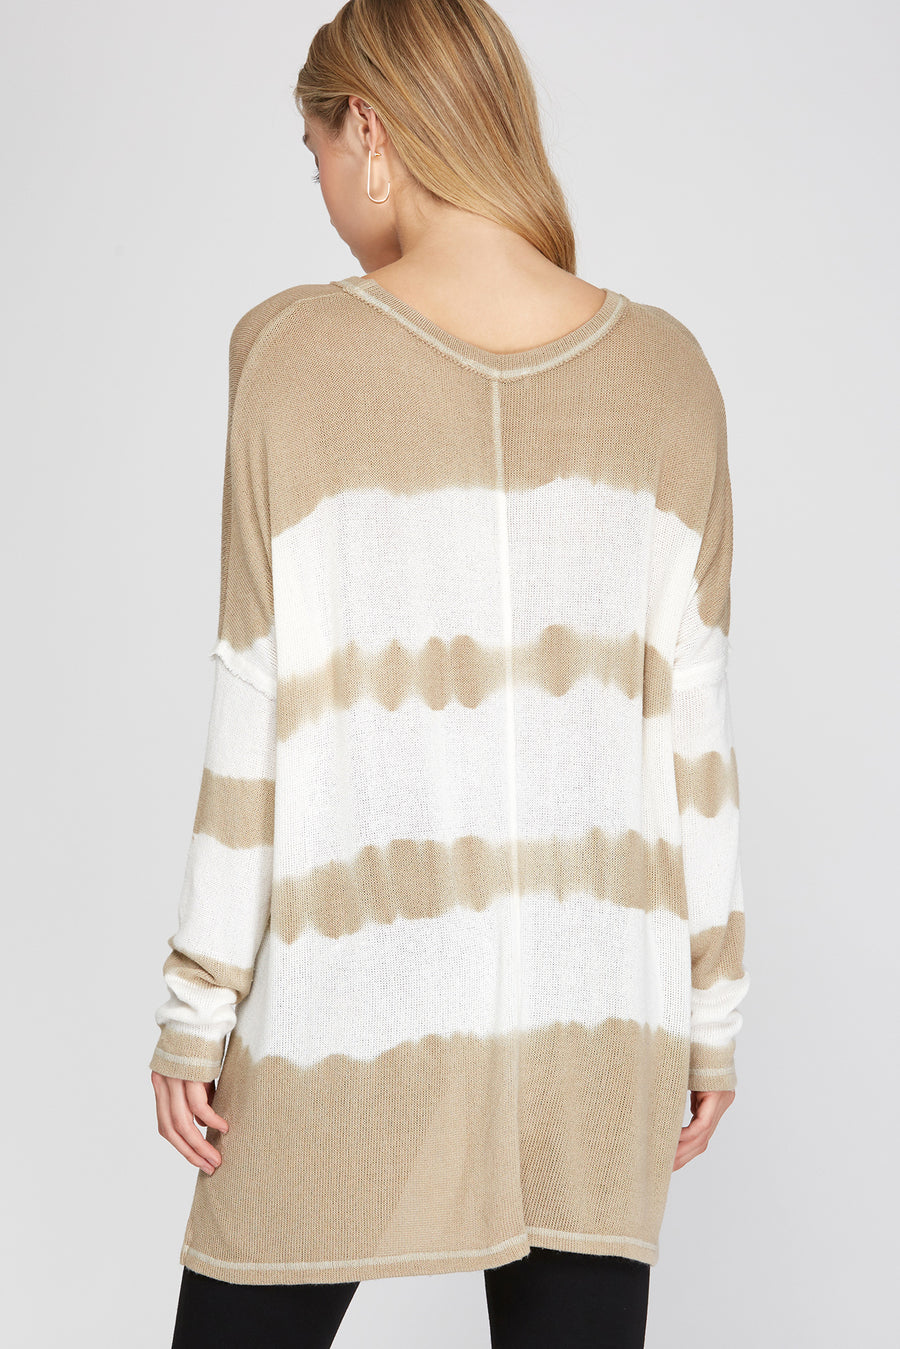 Tie Dye Knit Top - Taupe